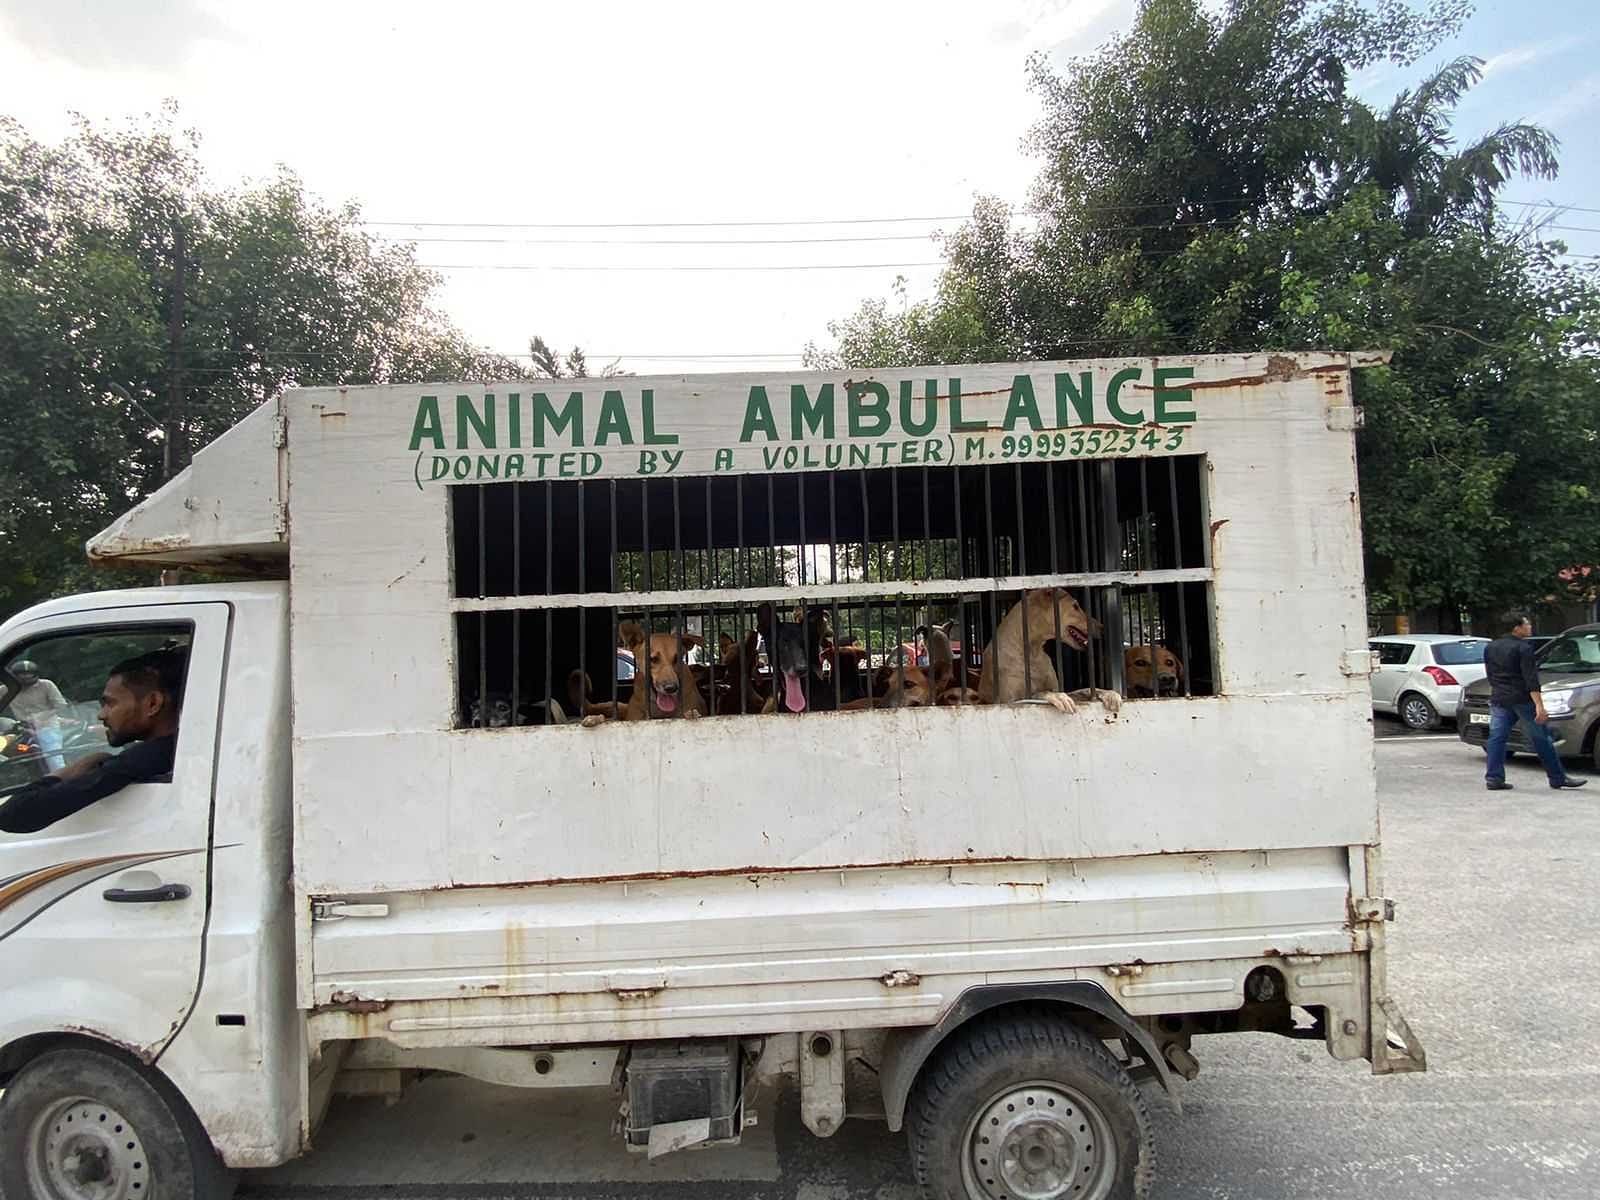 Friendicoes SECA contributed four vans to help transport the dogs to the shelter | Saniya Verma